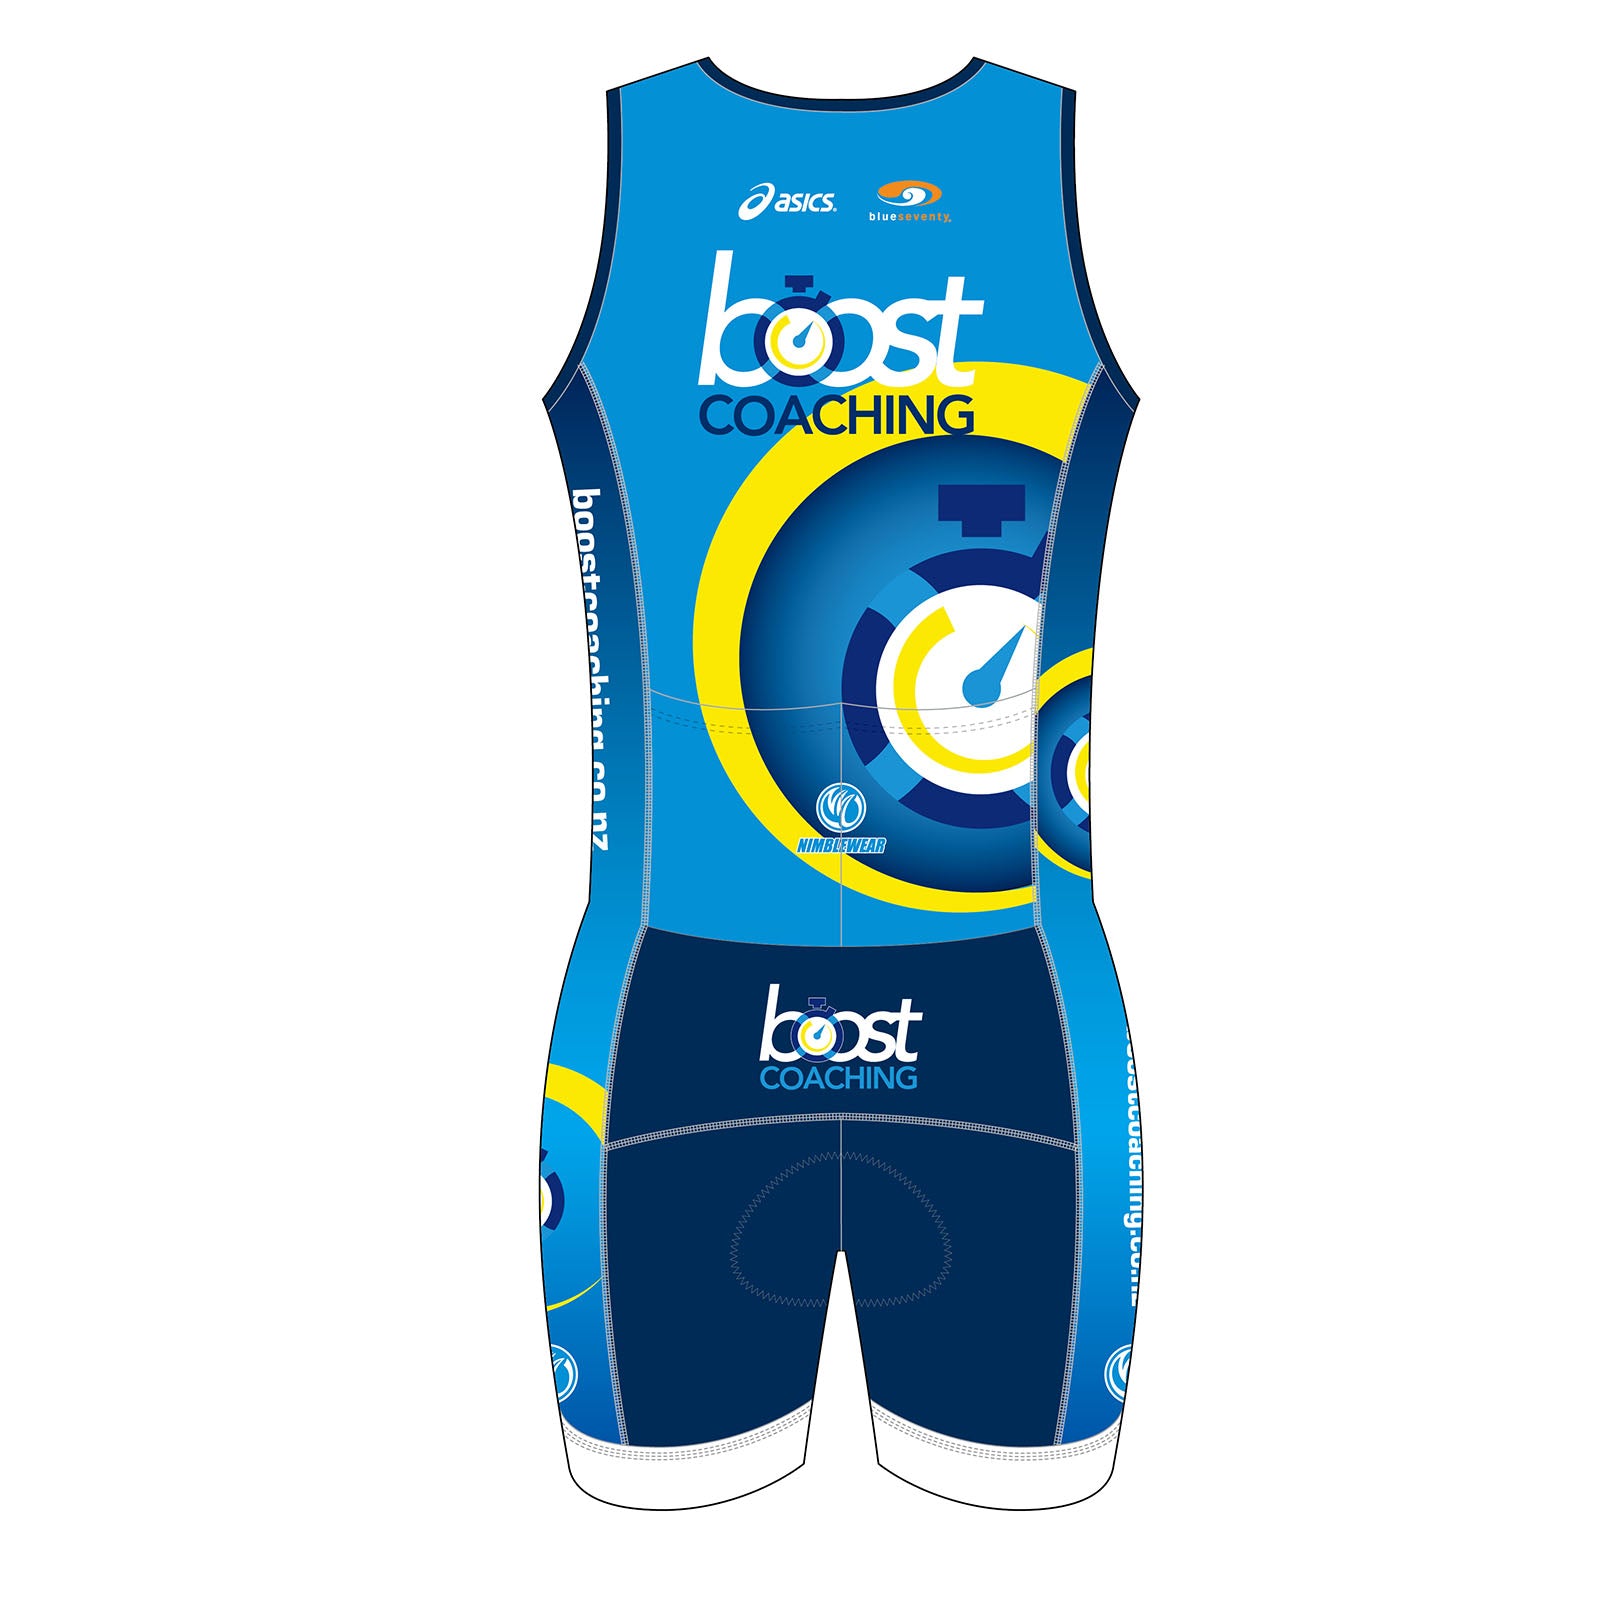 Boost Coaching PRO Sleeveless Tri Suits